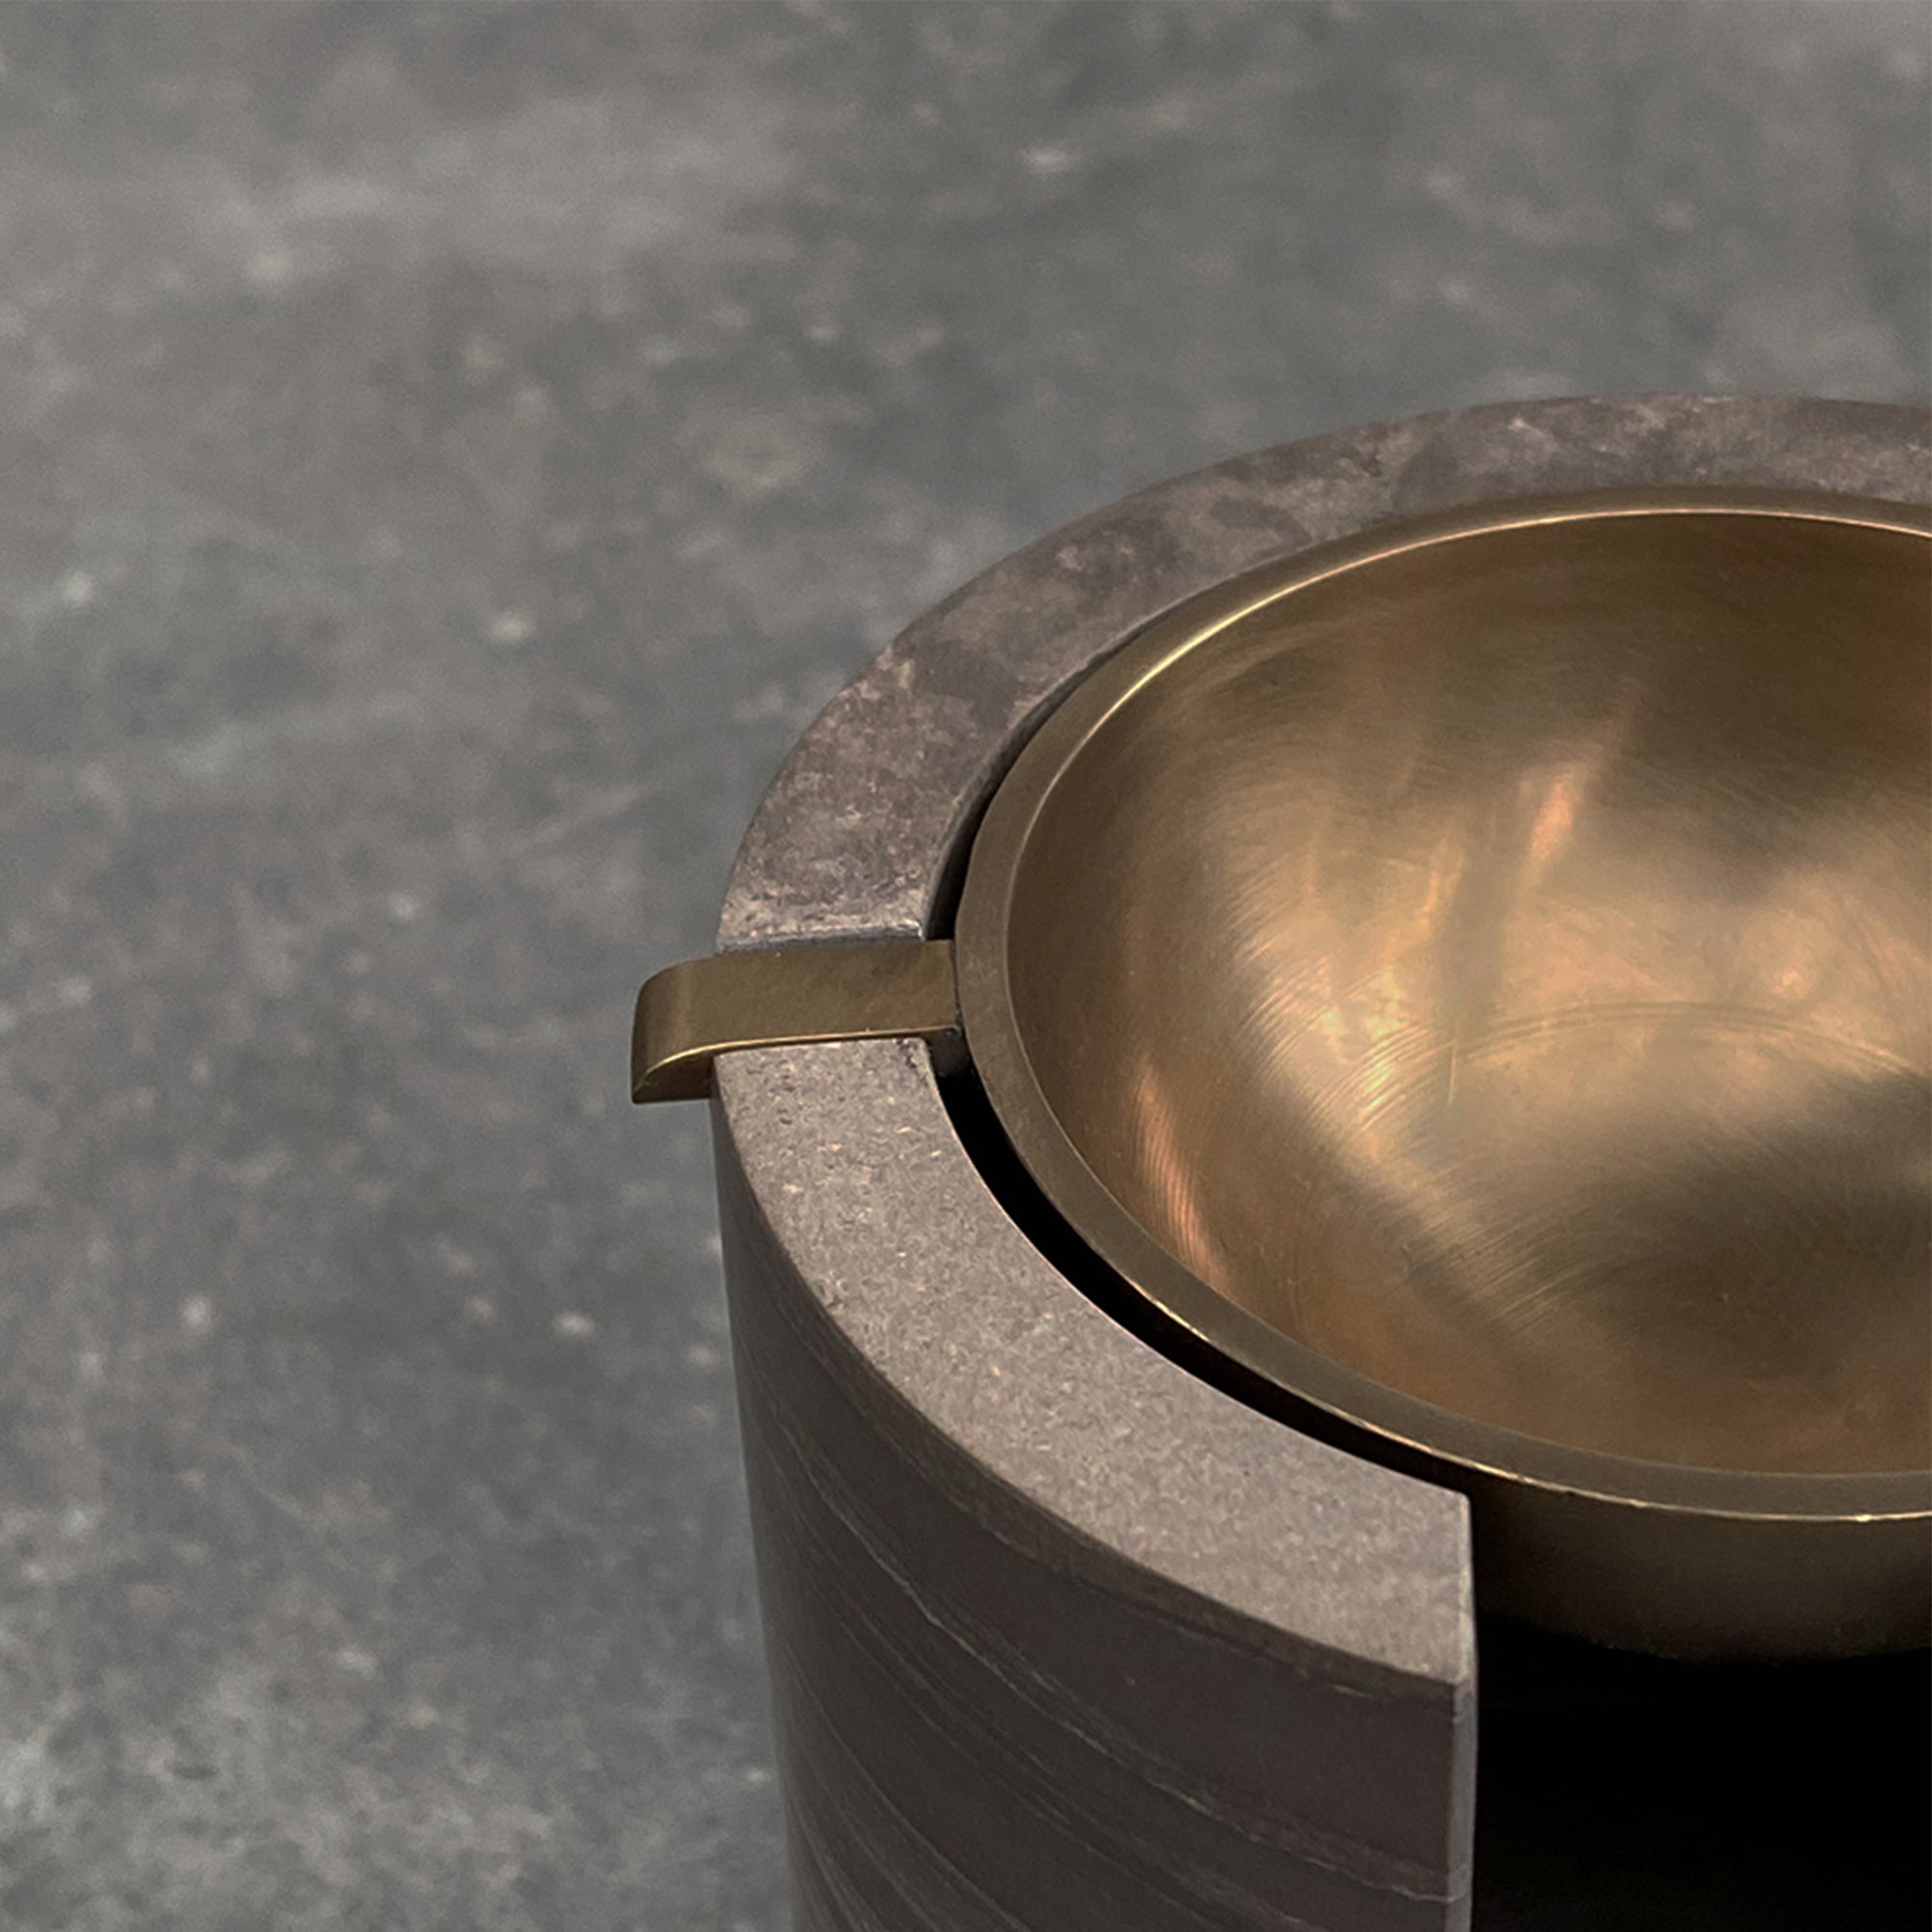 BRANDT Collective AURA Oil Burner in grey marble  Smoke Grey and satin brass bowl